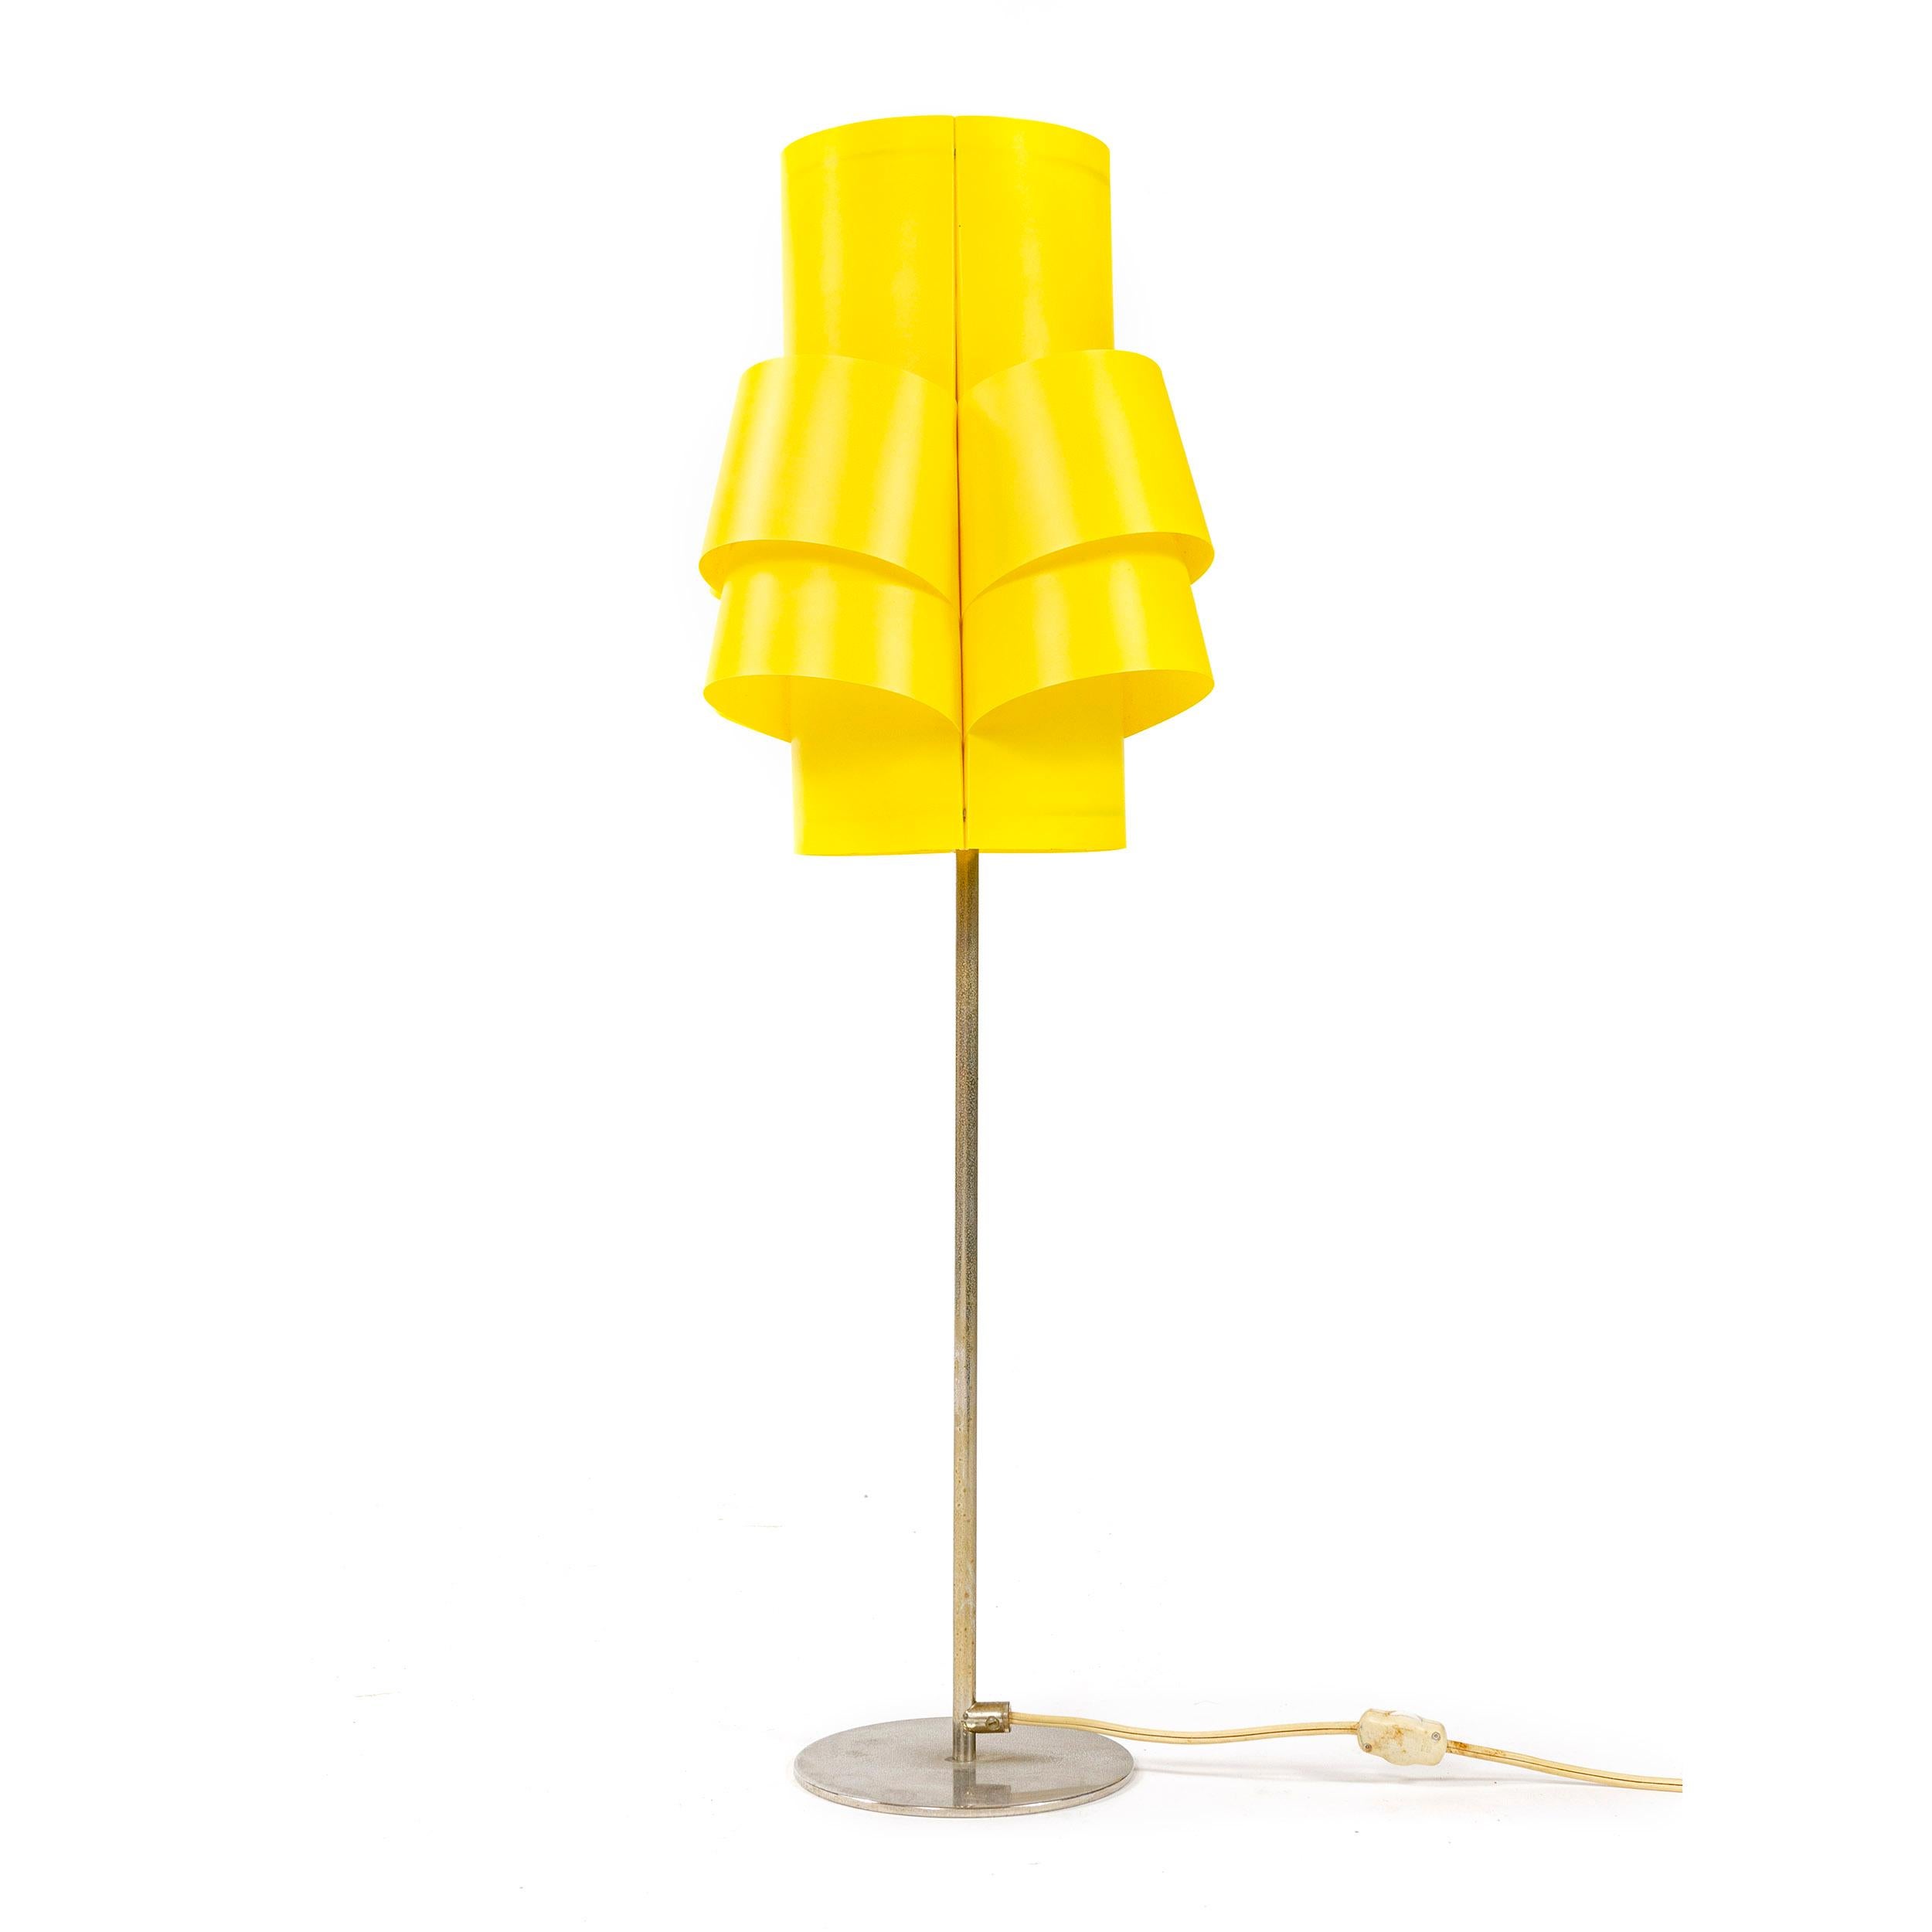 An electric lighting device having a shade of folded and formed yellow plastic attached to an inner wire frame threaded on to its electrical socket. It’s chromed metal base having a slender stem threaded into a circular weighted base with a separate